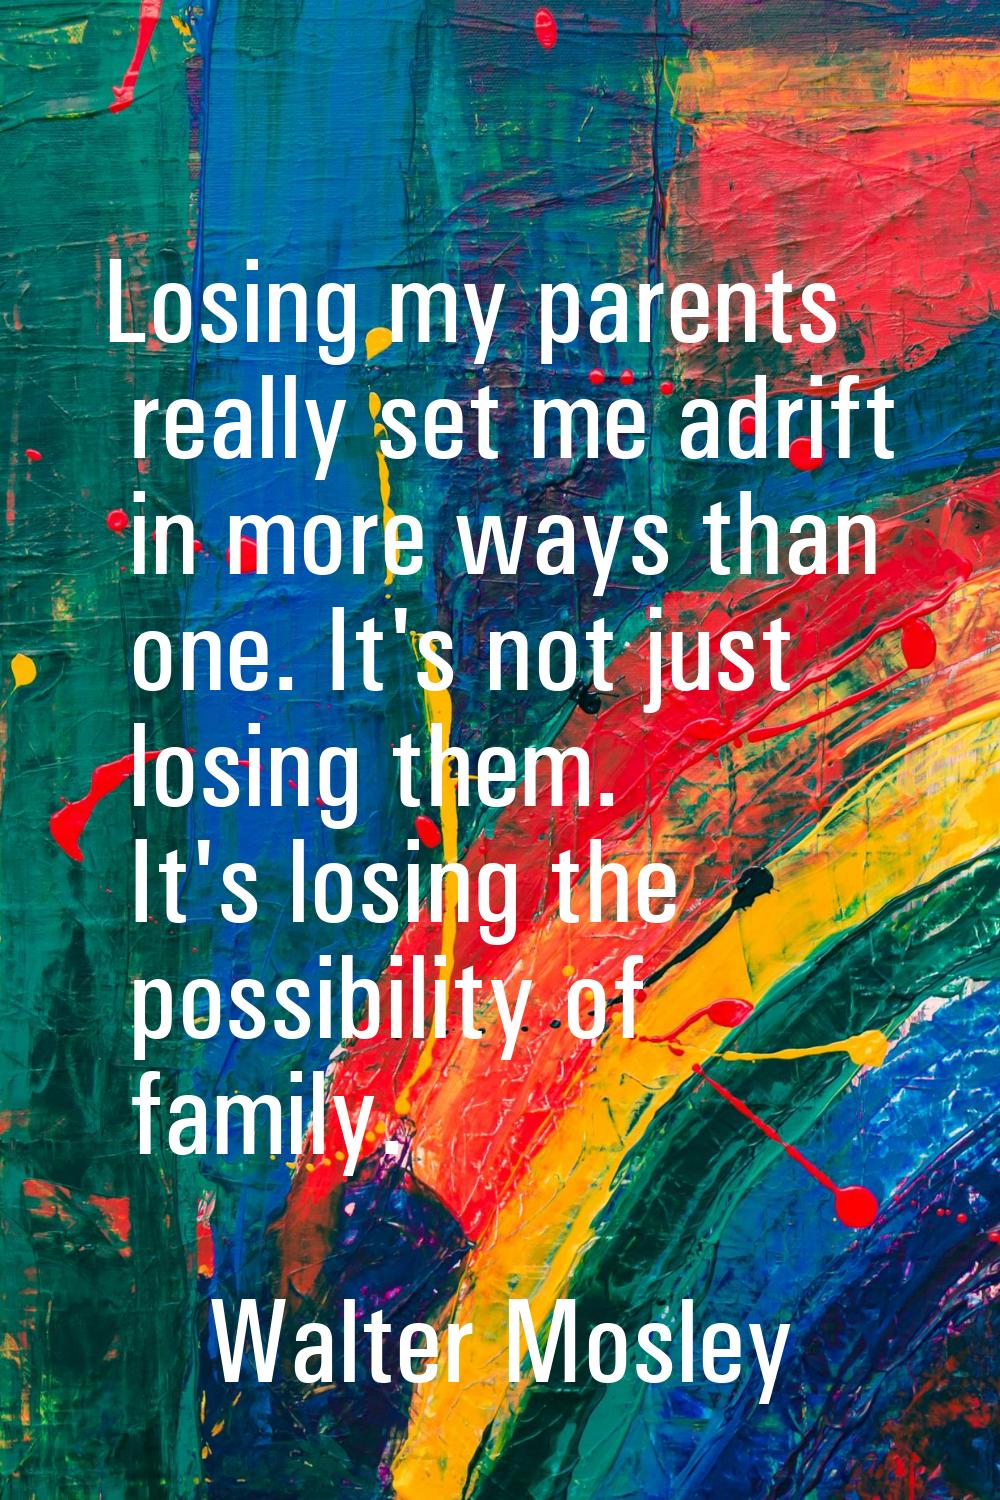 Losing my parents really set me adrift in more ways than one. It's not just losing them. It's losin